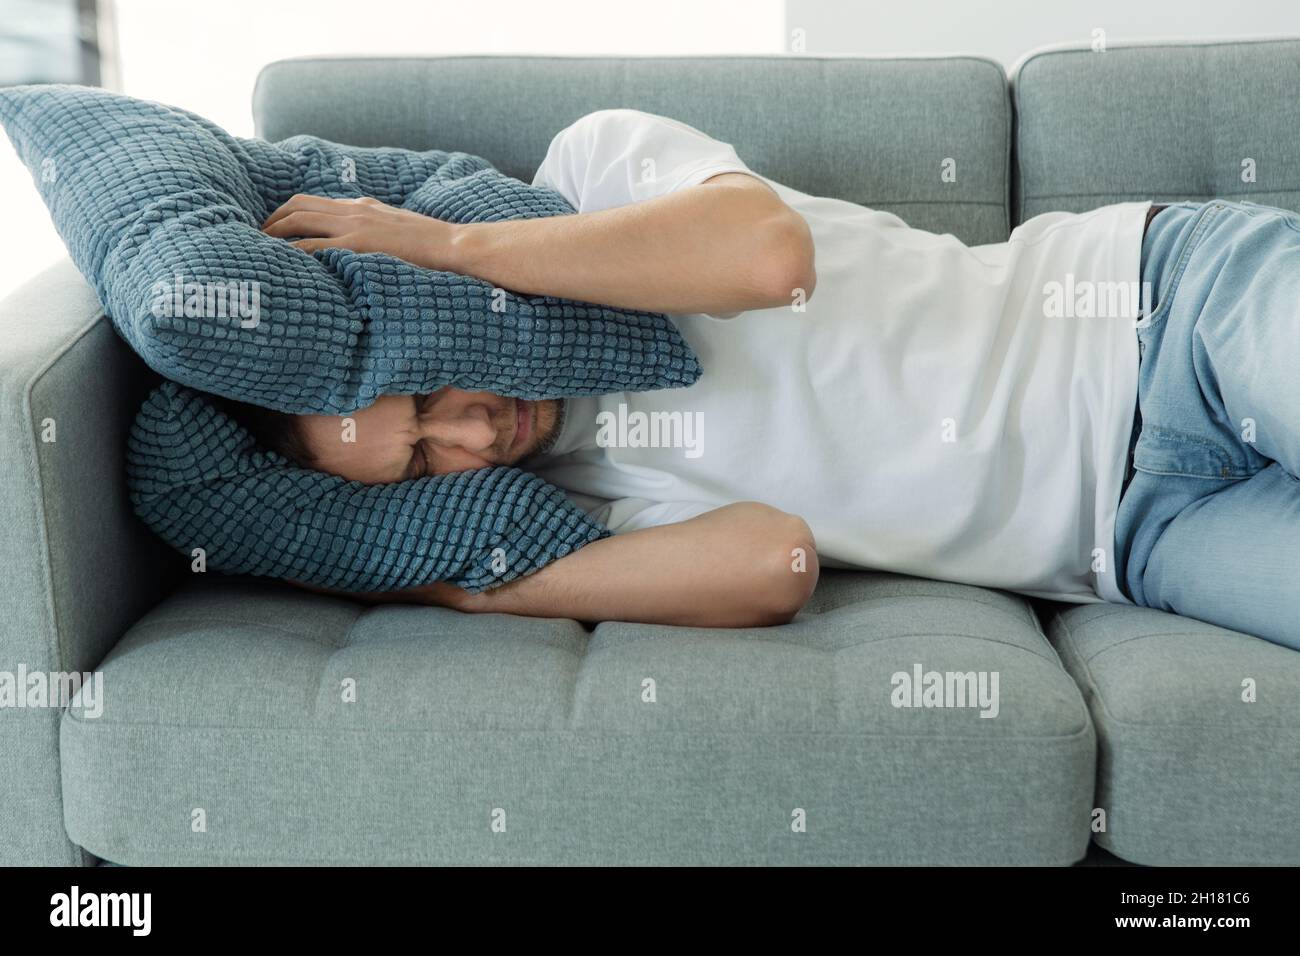 Sleepless man tired of noisy sounds from neighbors try to sleep on sofa covering head with pillows Stock Photo